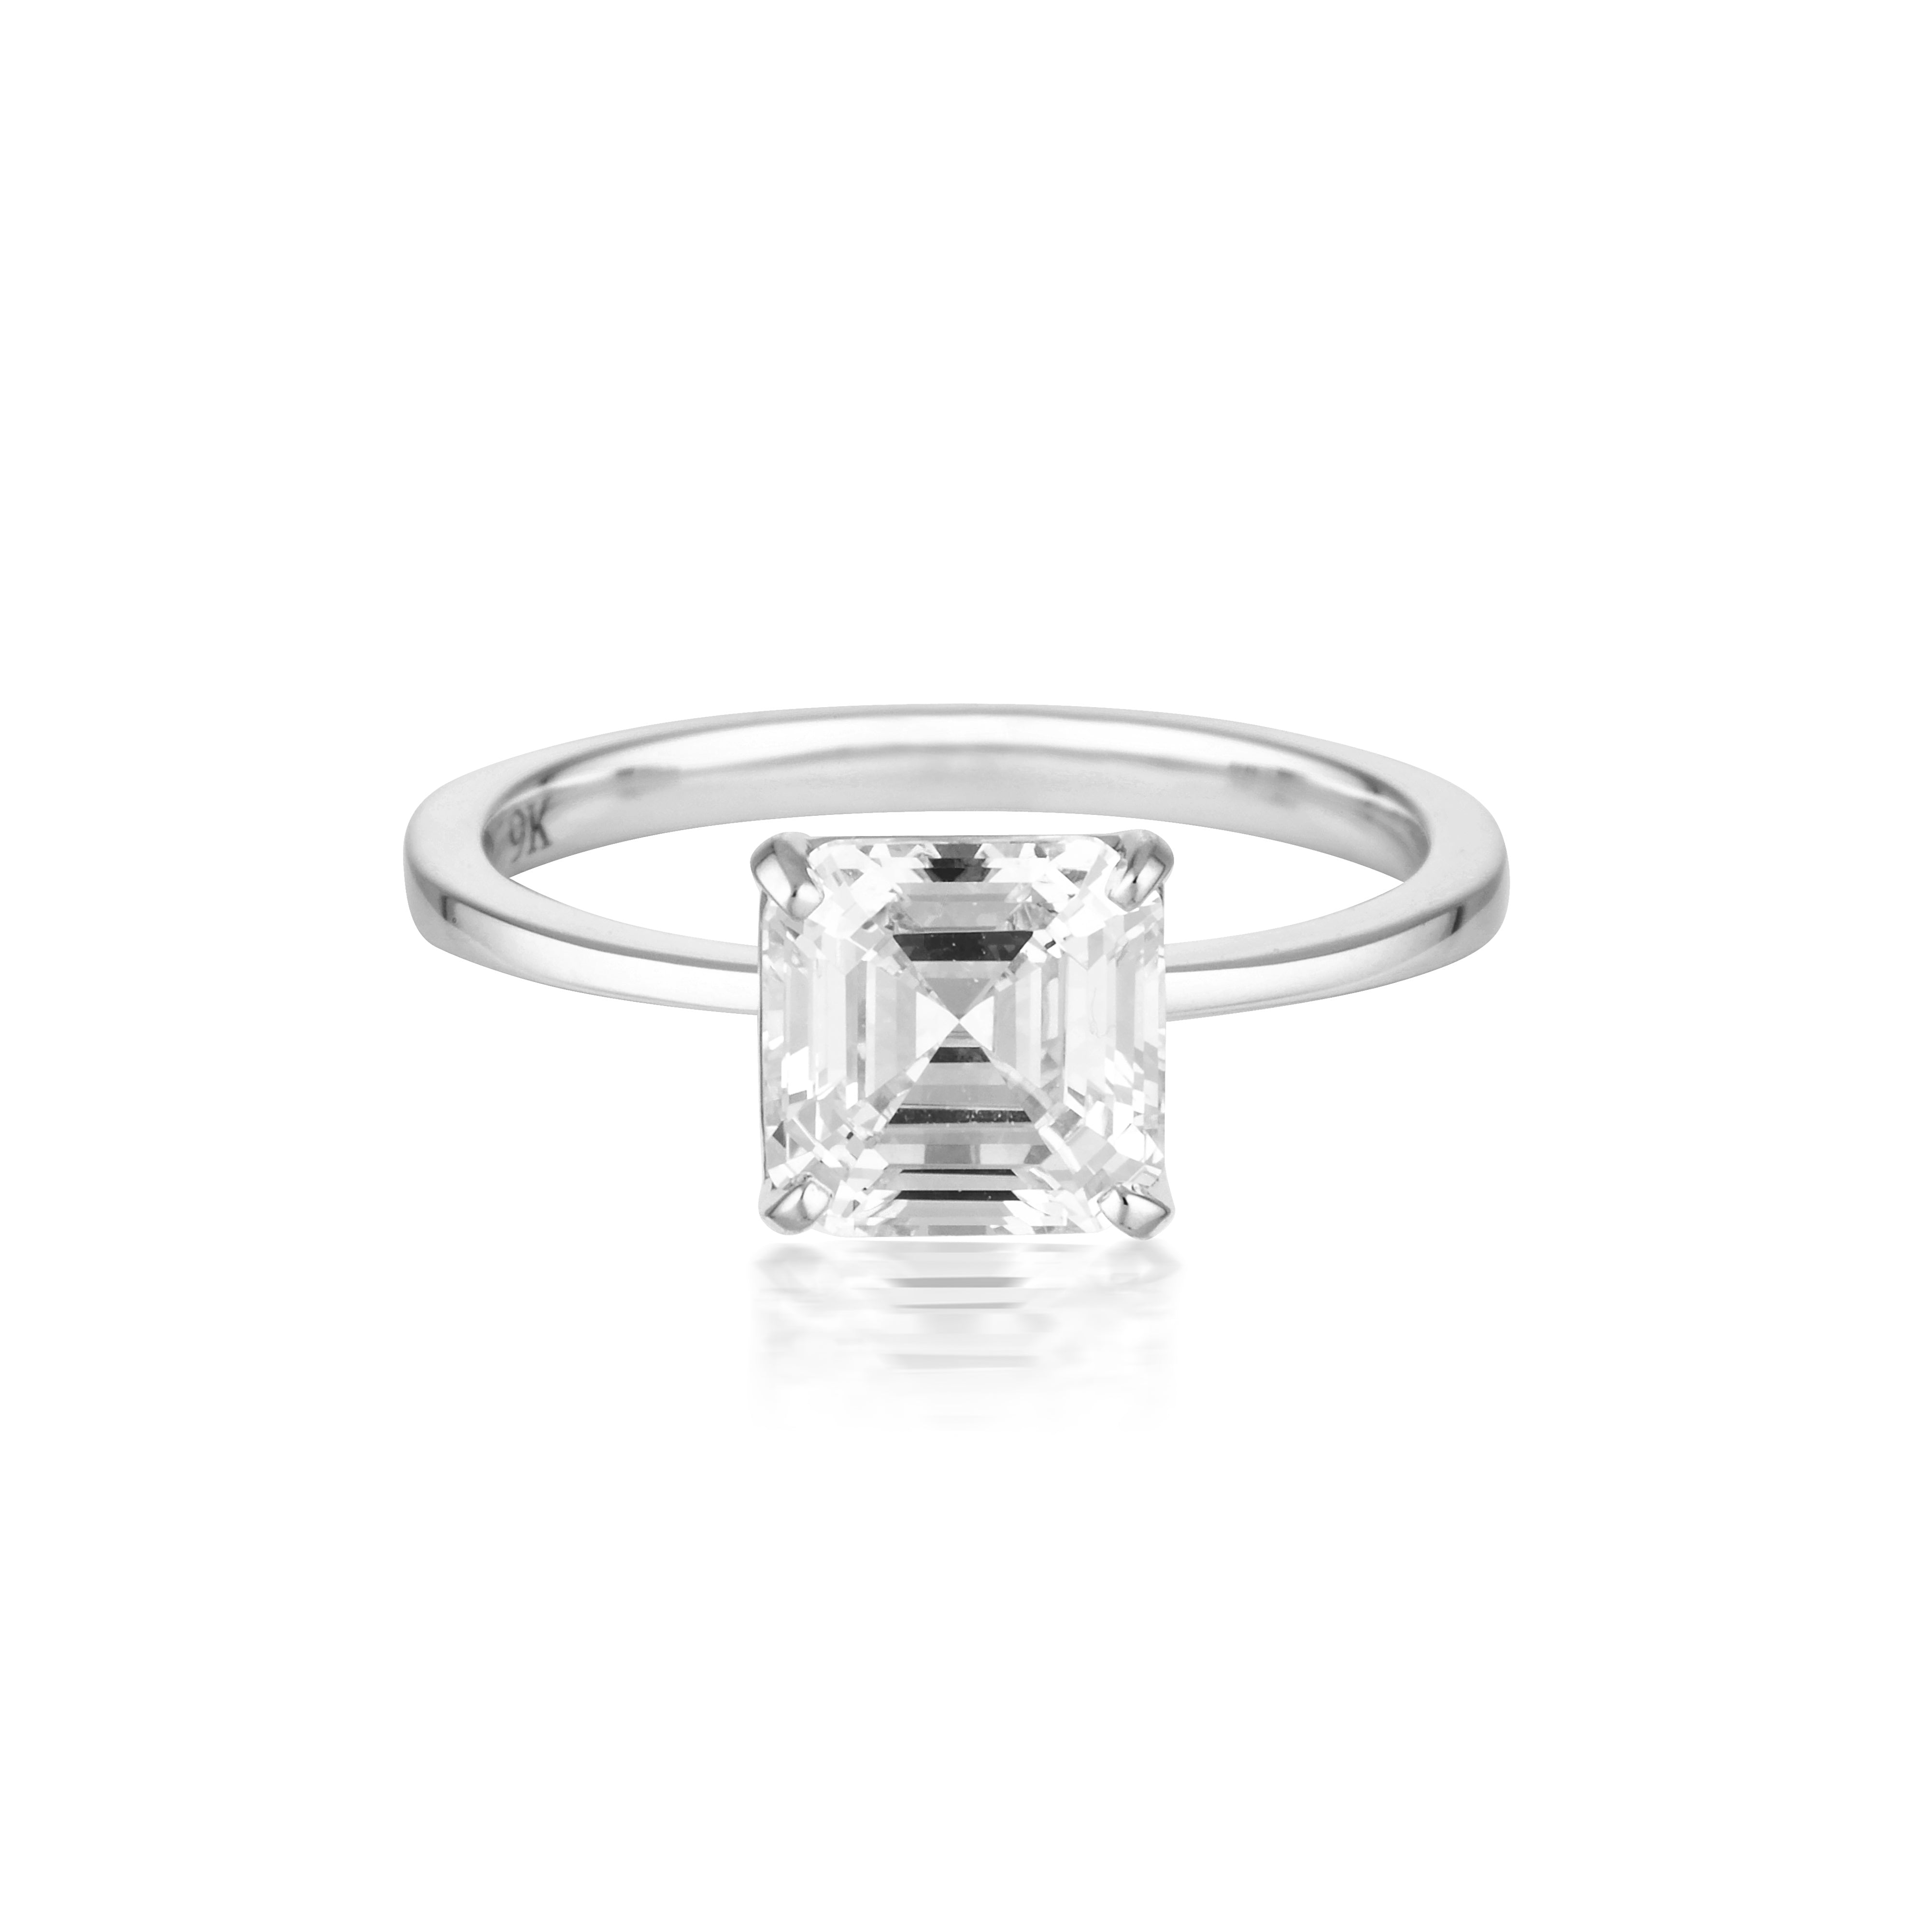 EMERALD CUT SOLITAIRE 1.5TCW IN 9CT MOISSANITE ENGAGEMENT RING